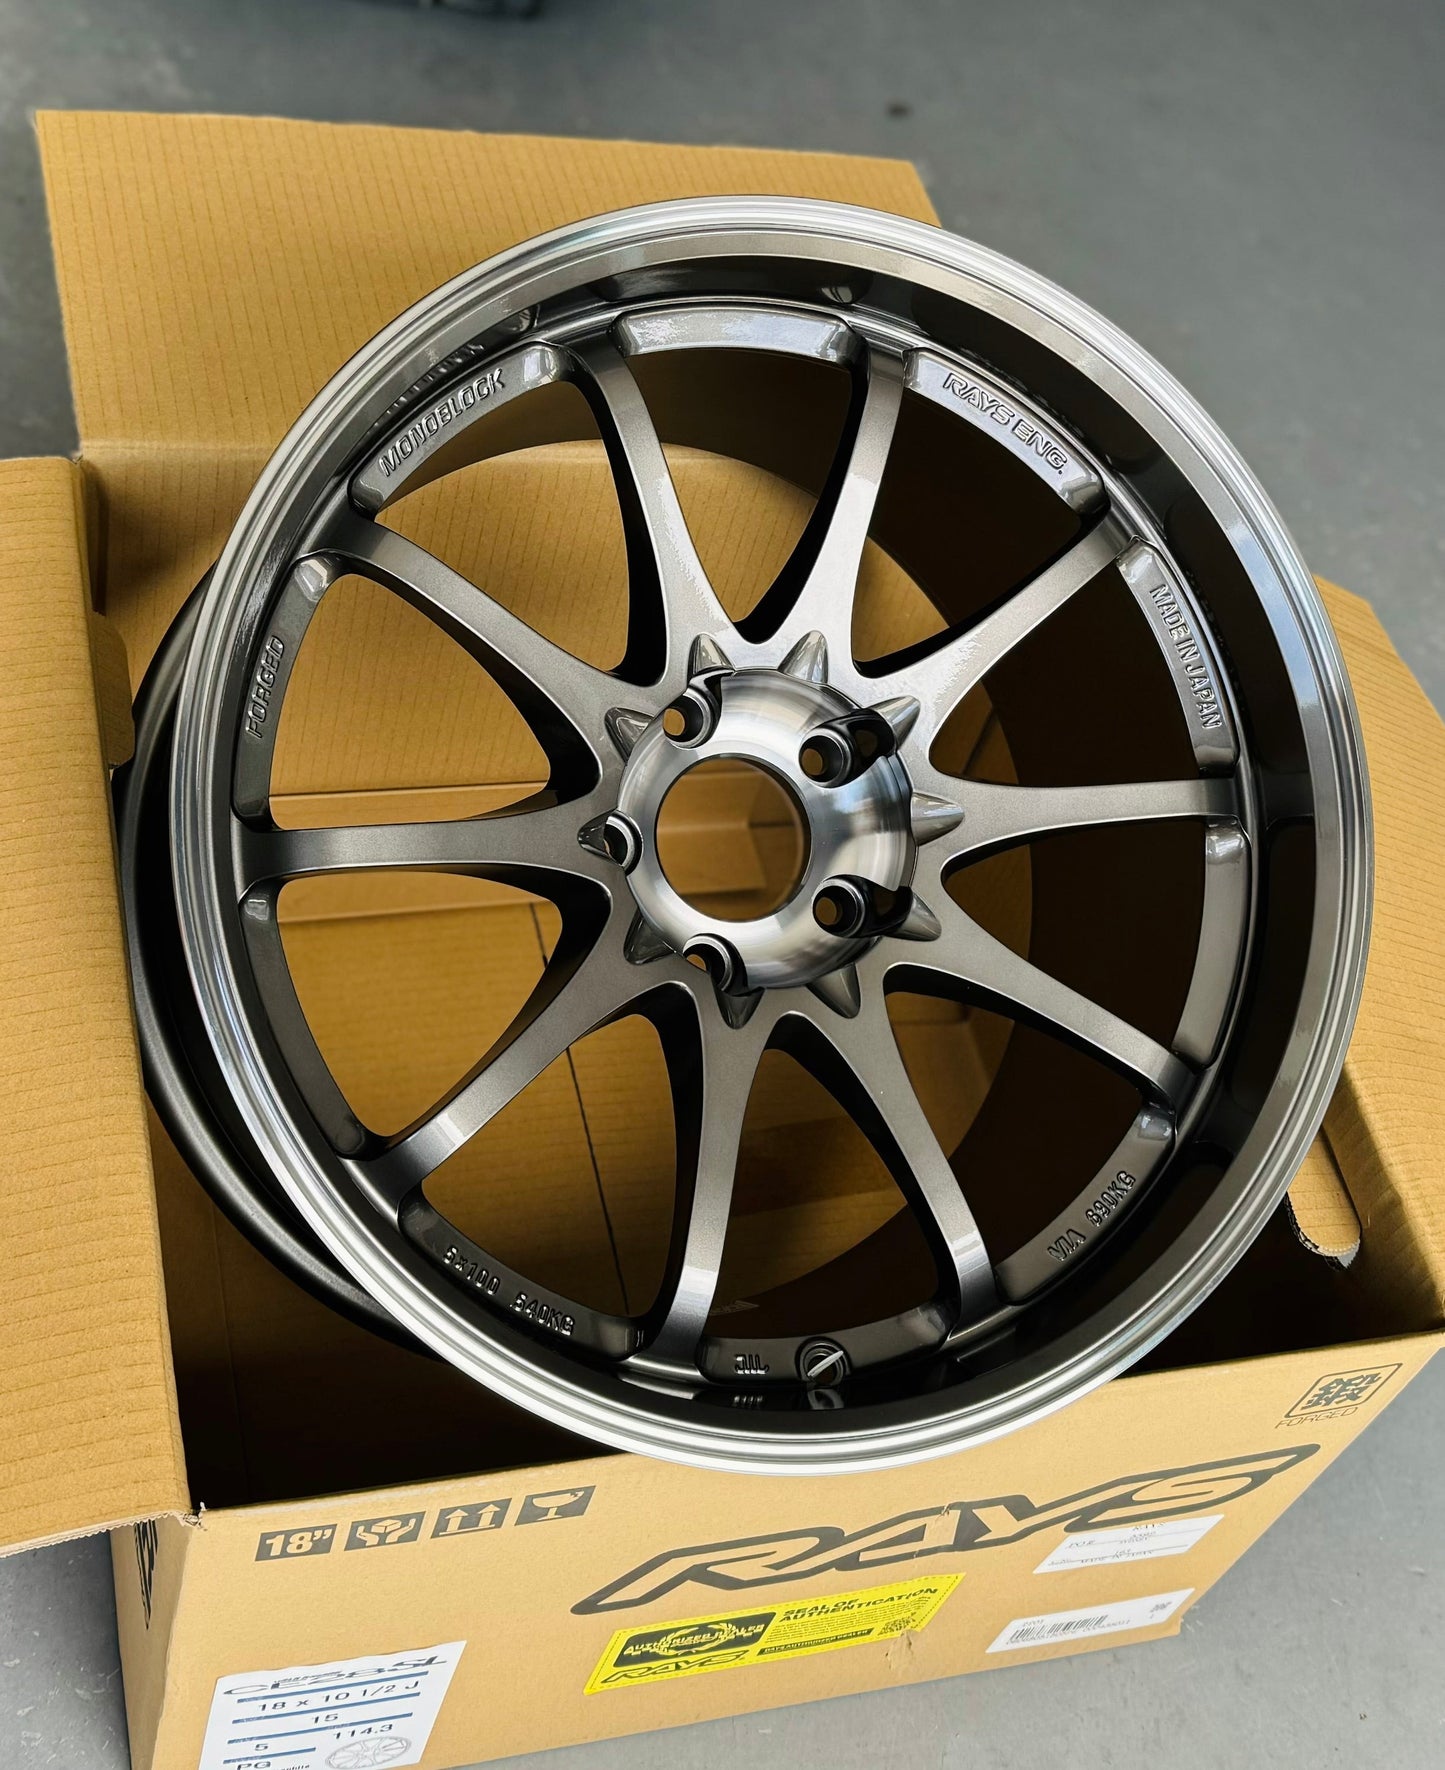 RAYS CE28SL PRESSED GRAPHITE 18x9.5 +22 | 18x10.5 +15 5-114.3 STAGGERED